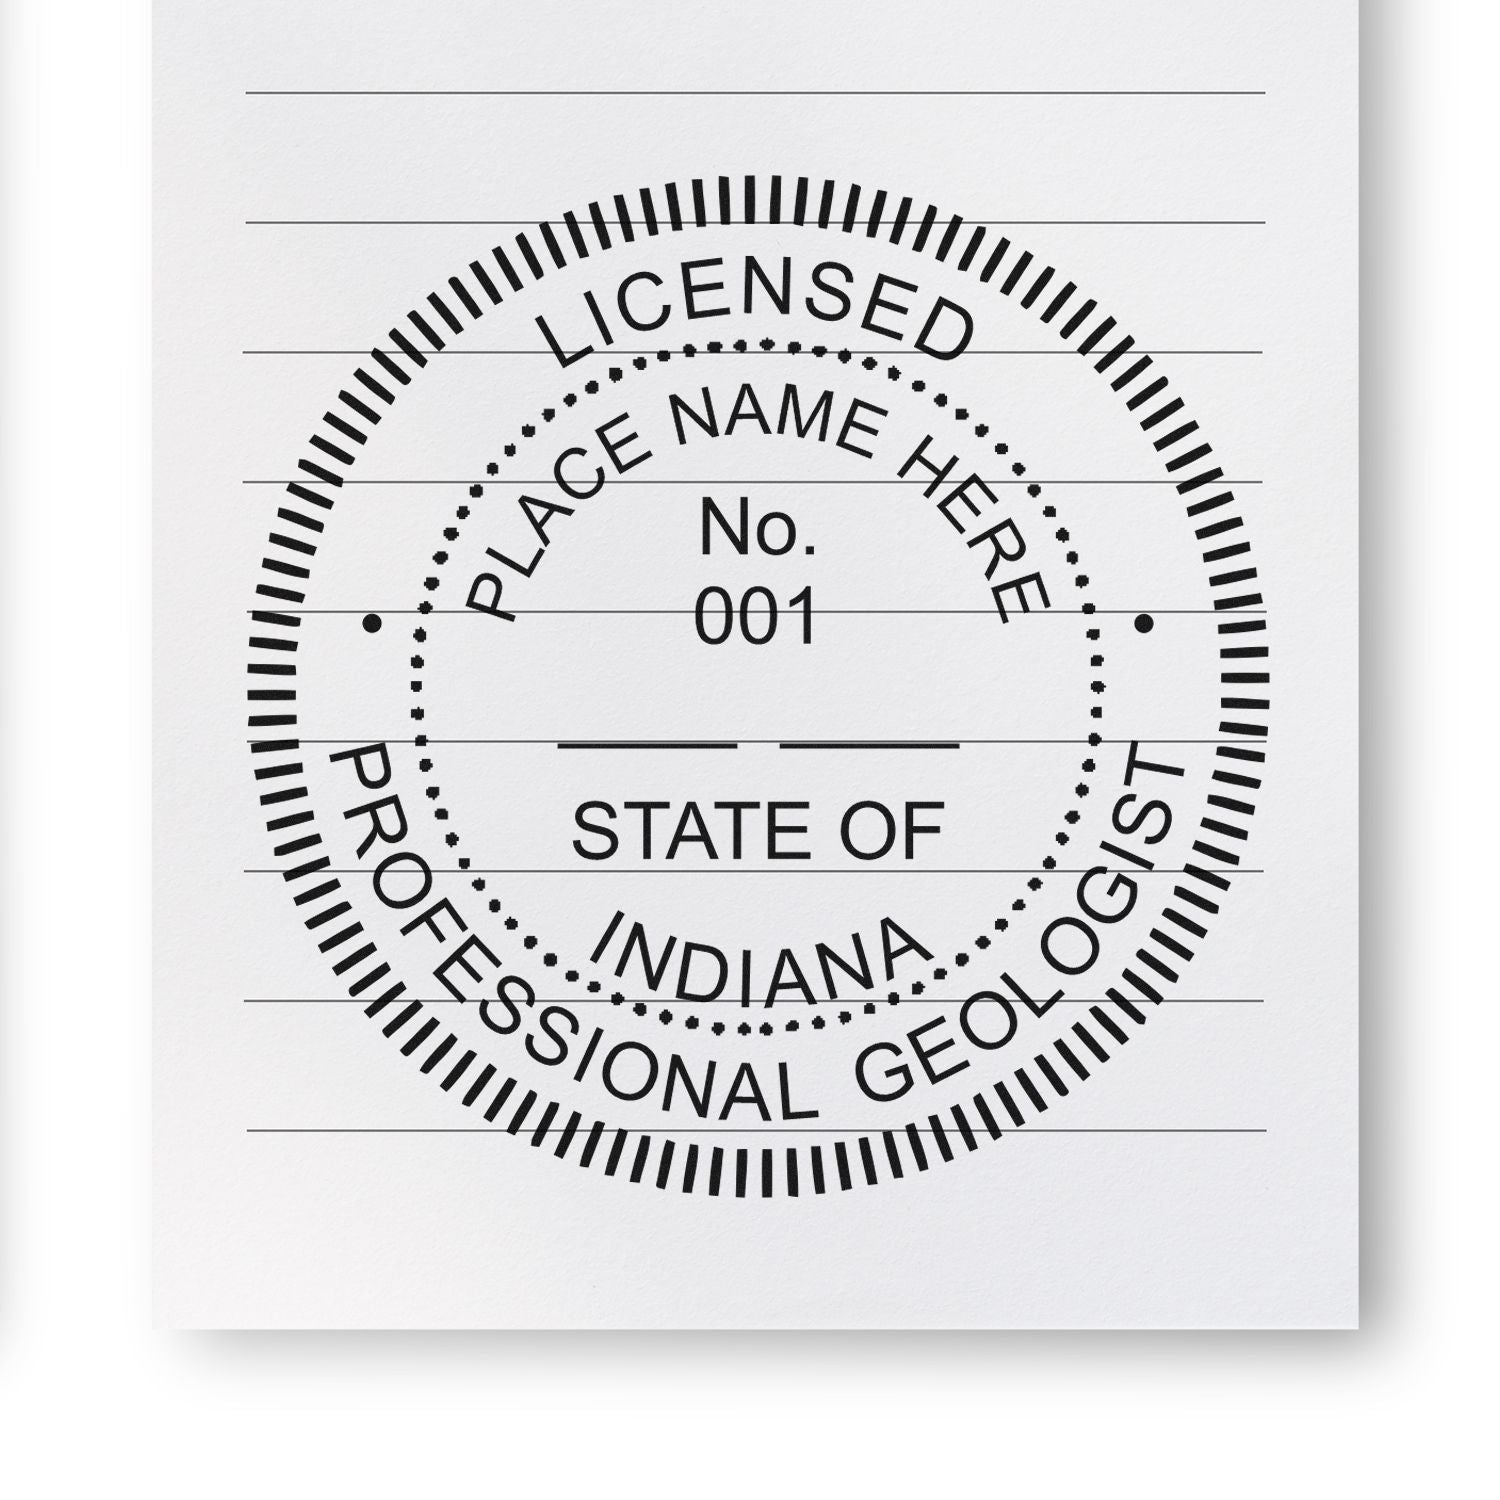 The main image for the Premium MaxLight Pre-Inked Indiana Geology Stamp depicting a sample of the imprint and imprint sample